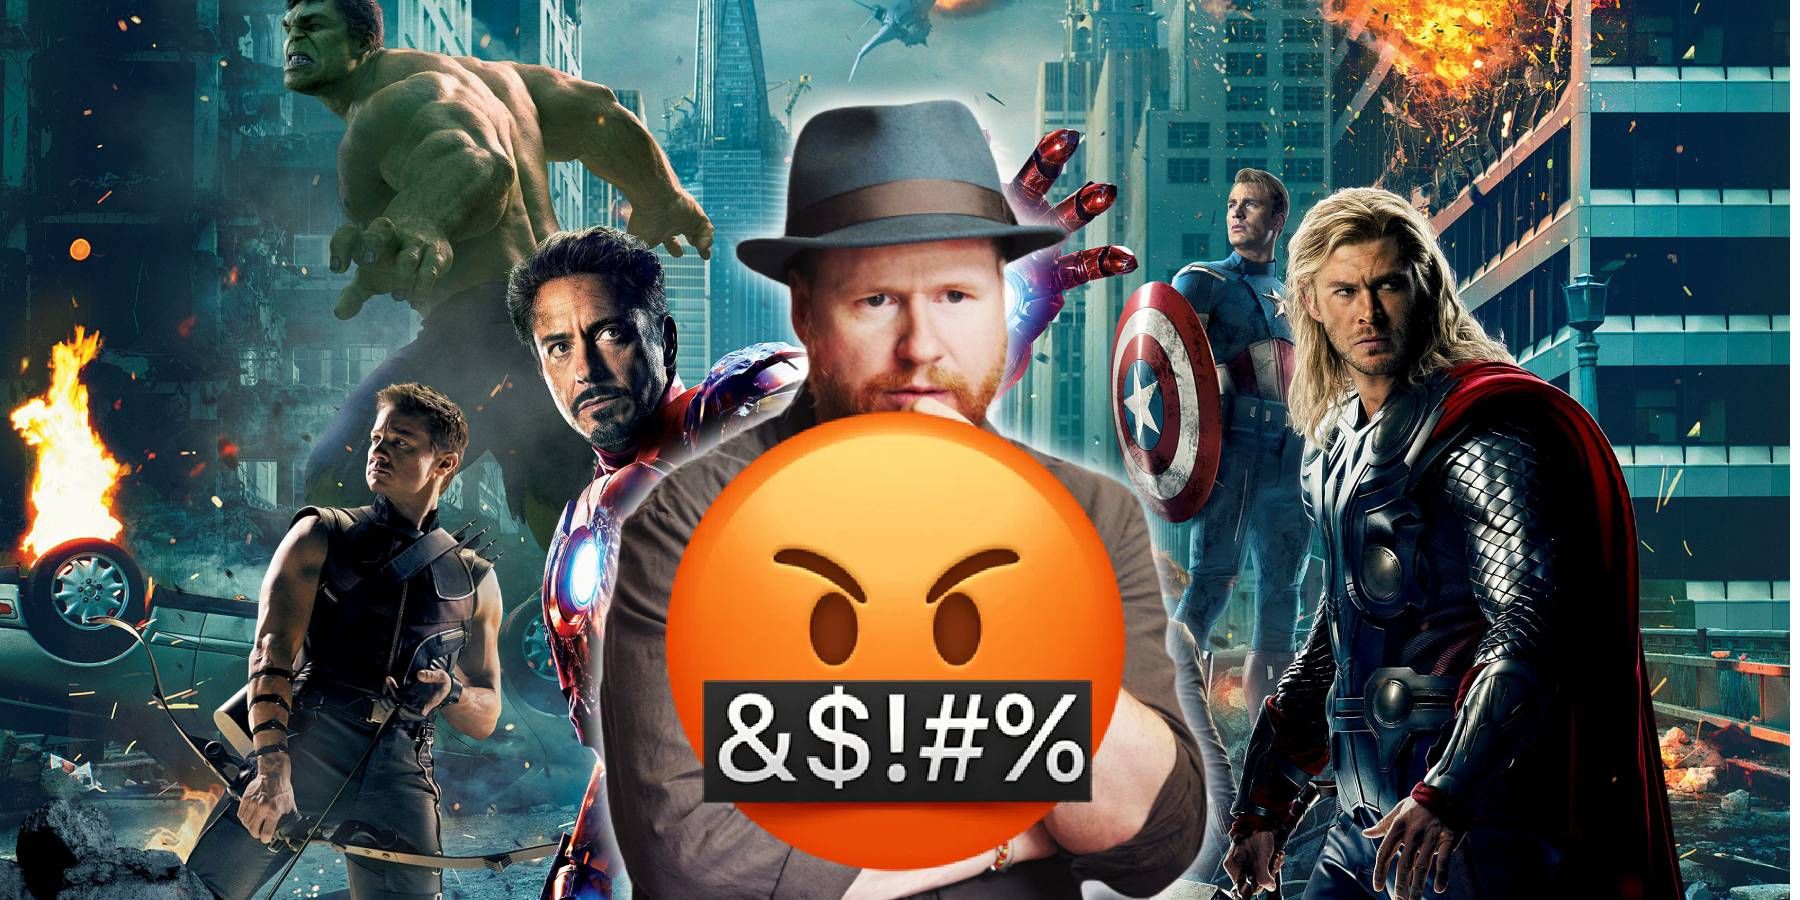 The Avengers promo image with director Joss Whedon and a swearing emoji